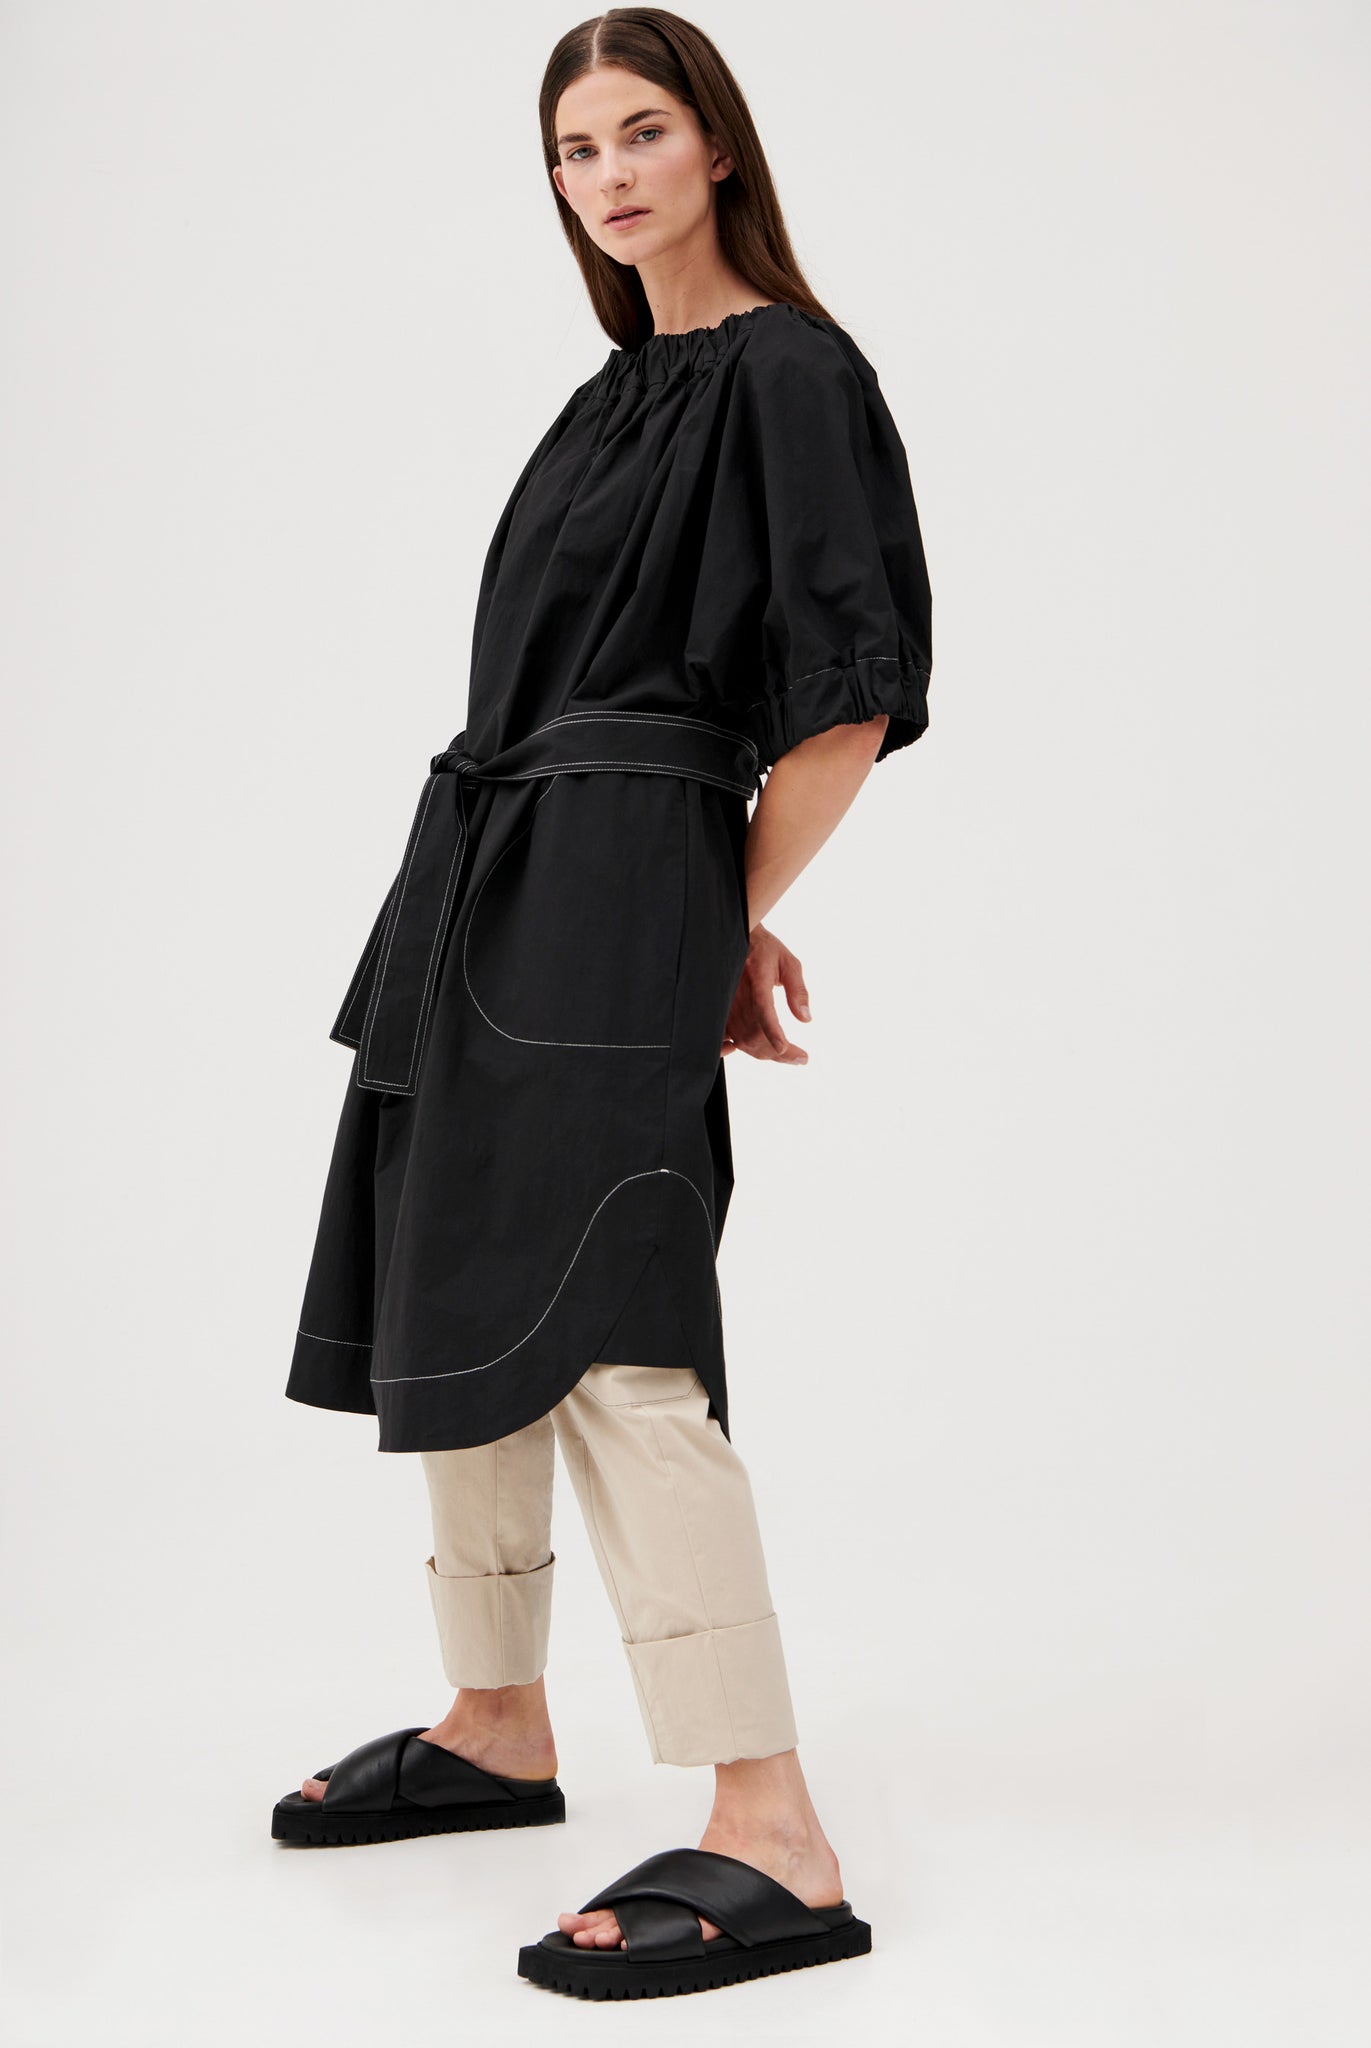 Cuspi Panorama Elasticated Dress and Cuffed Pant. Shop local and explore the latest collection of trans-seasonal styles designed and made in Melbourne, Australia. Cuspi: born with the desire to create considered high quality timeless pieces for everyday.